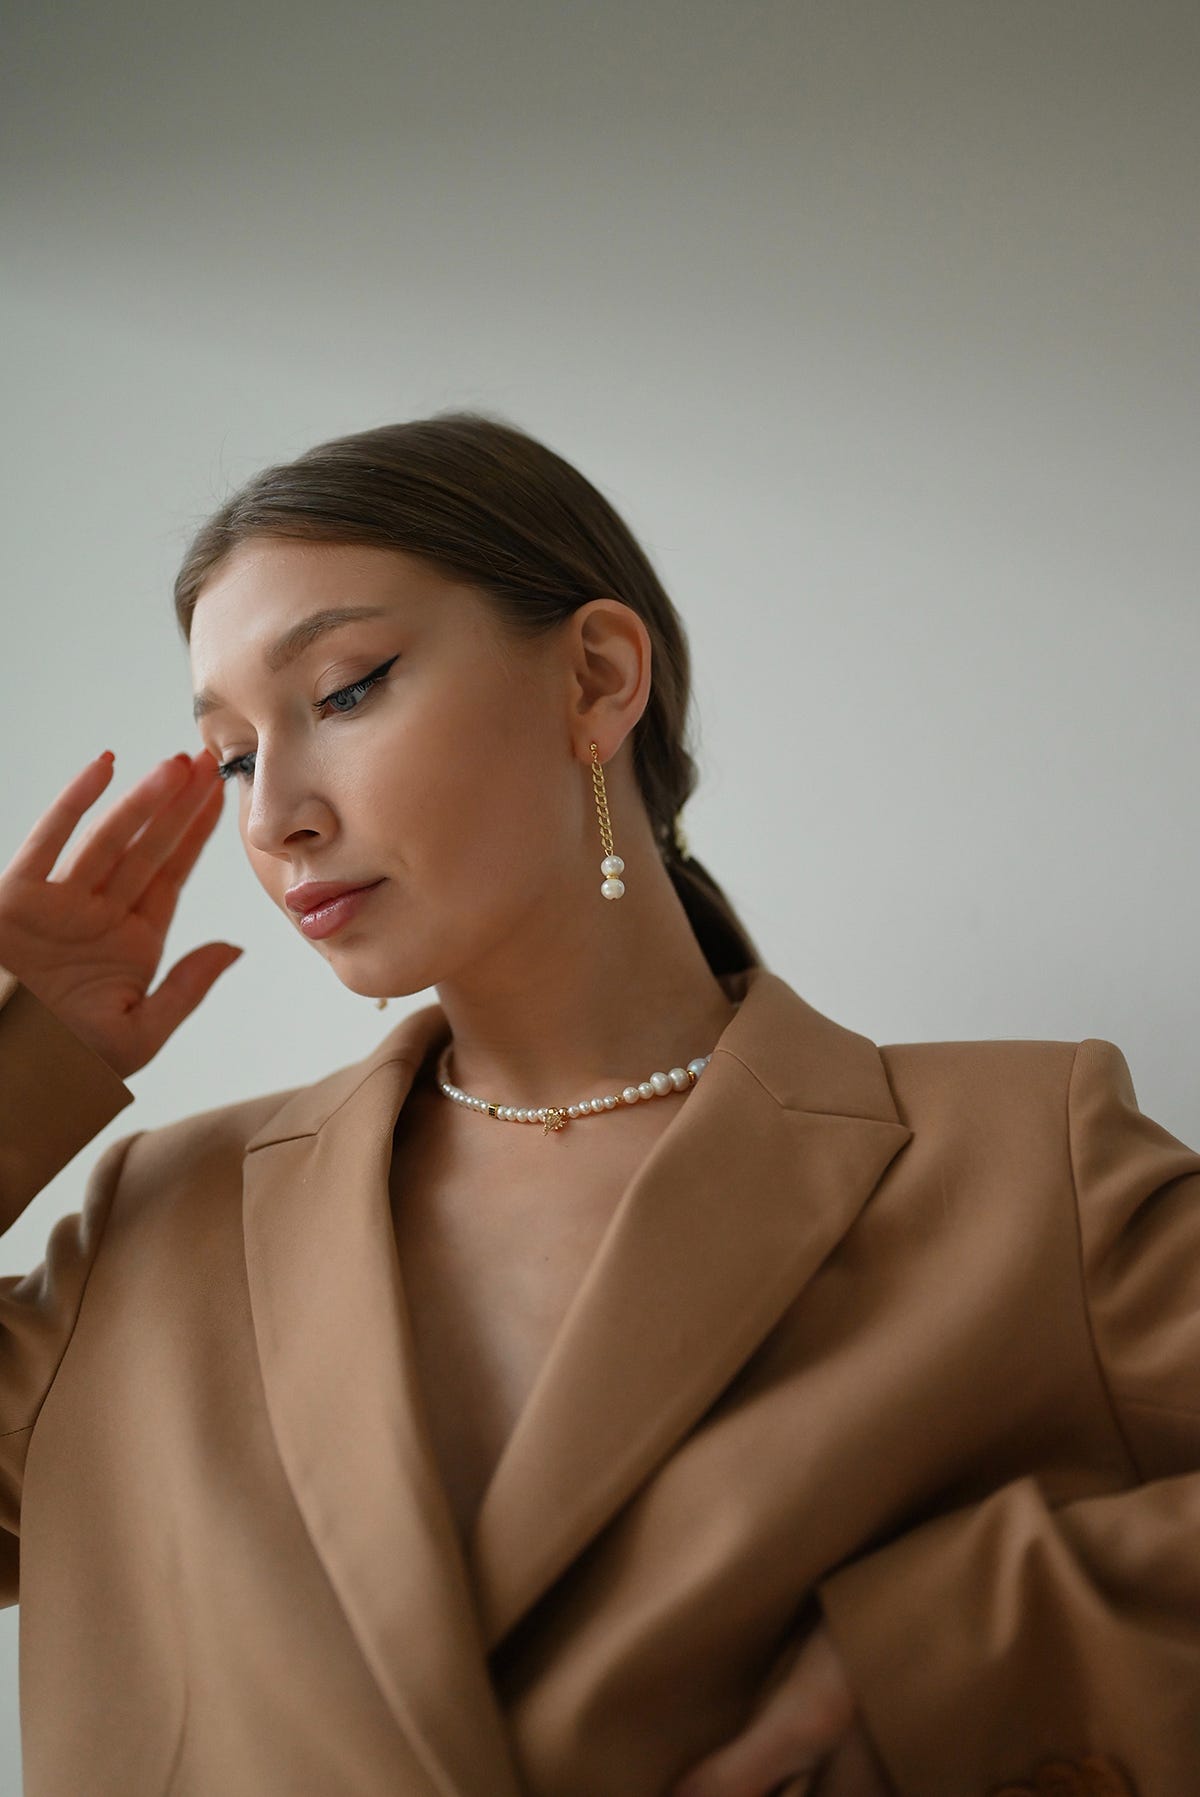 The Pearl Trend Is Back for 2023—Here's How to Wear Yours